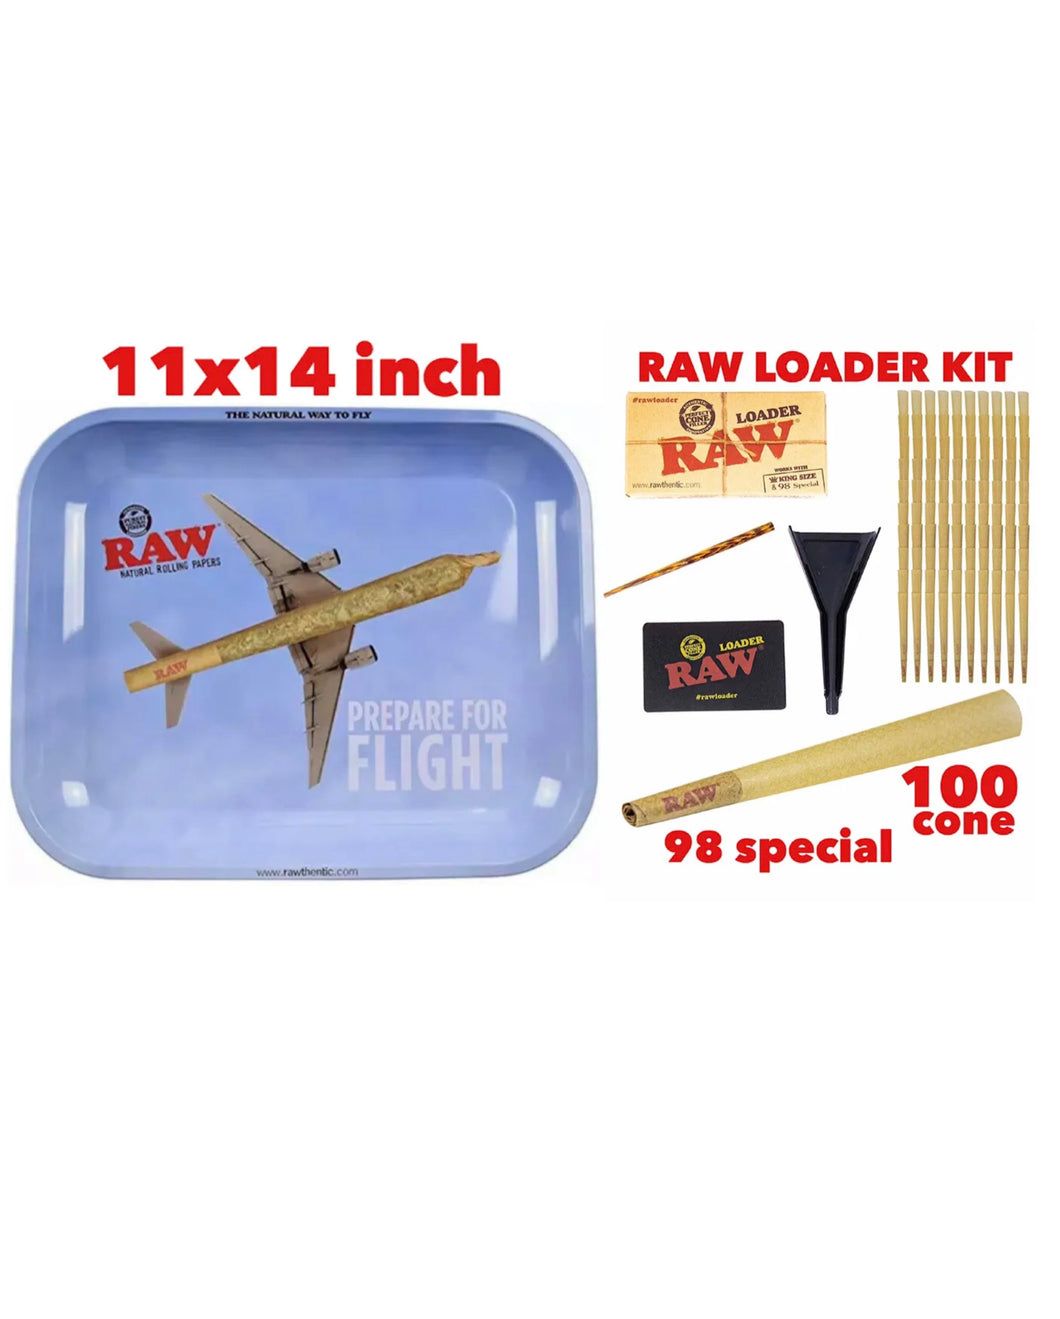 raw rolling metal tray(FLIGHT)large+raw 98 special size cone(100 pack)+cone loader kit